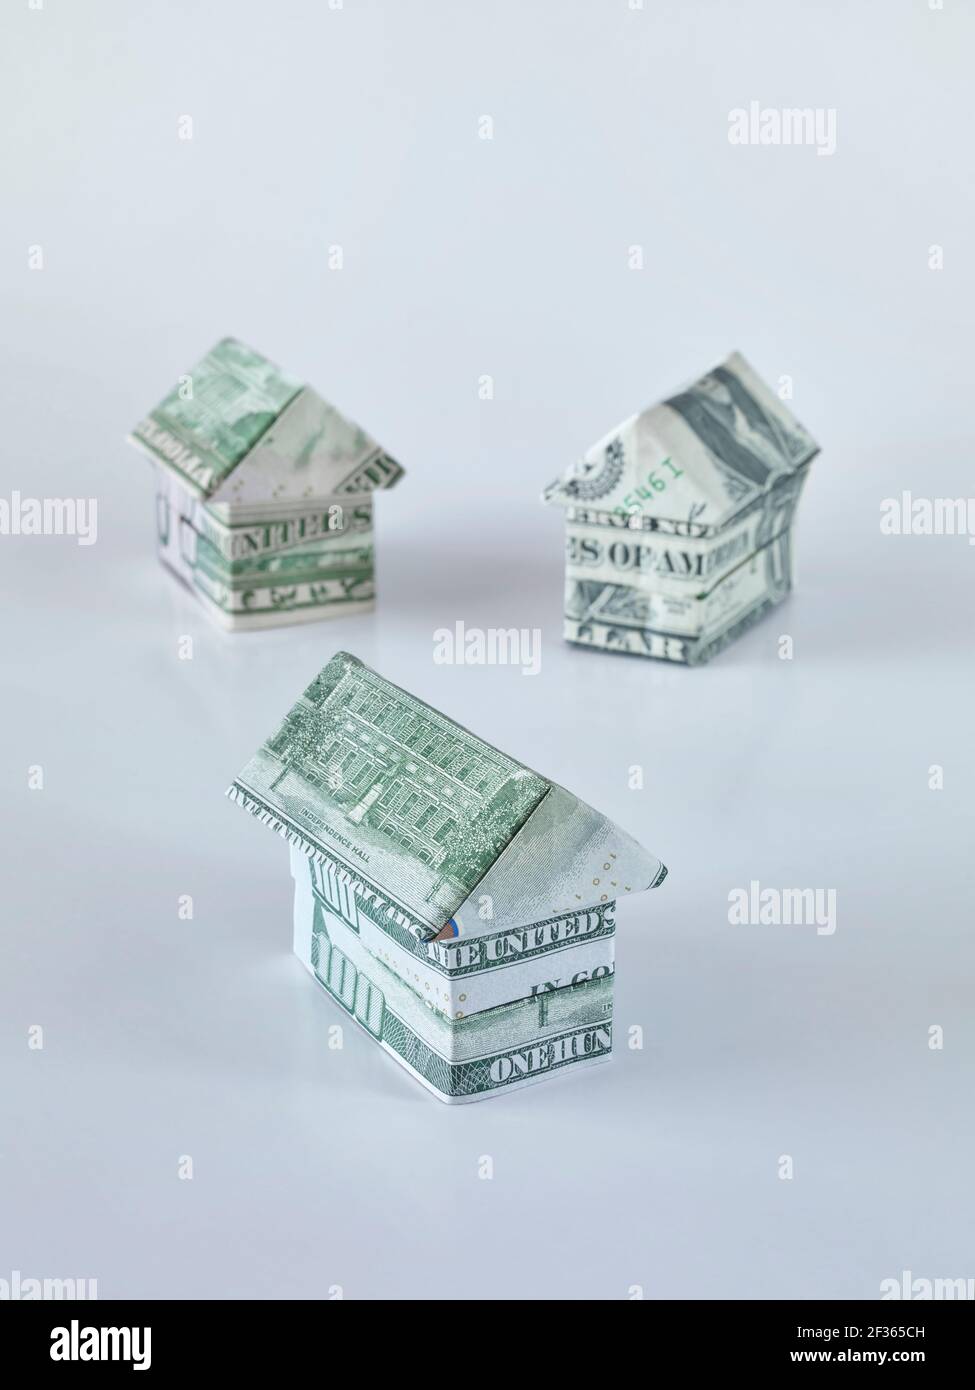 Origami houses made of dollar bills Stock Photo